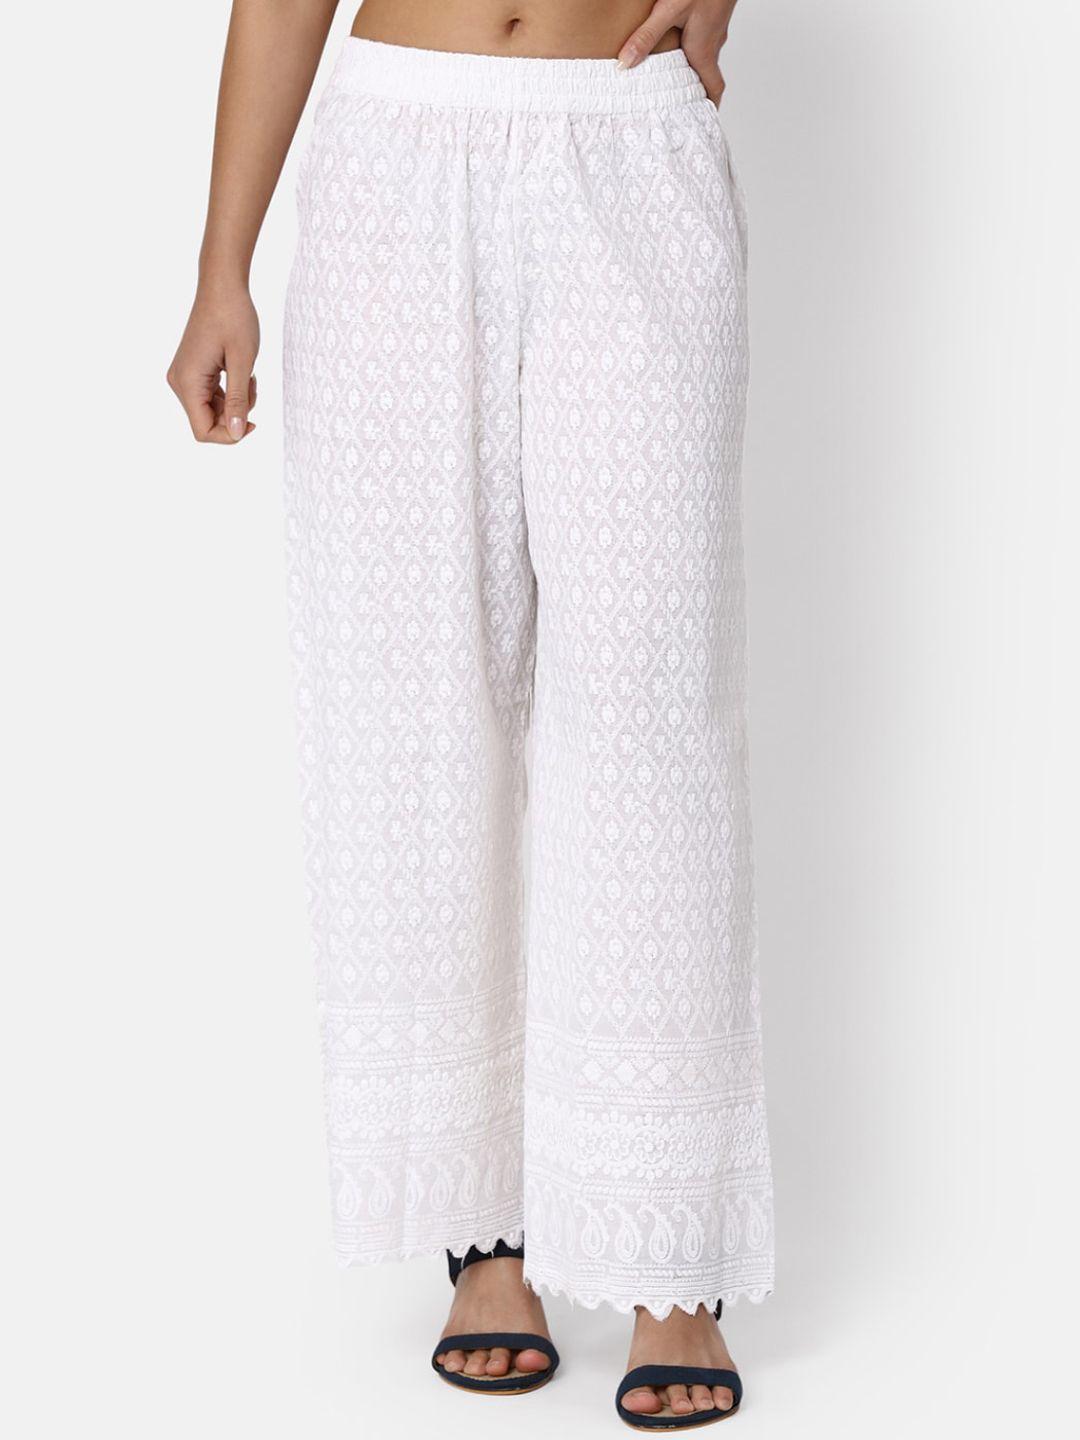 v-mart-women-floral-embroidered-cotton-parallel-trousers